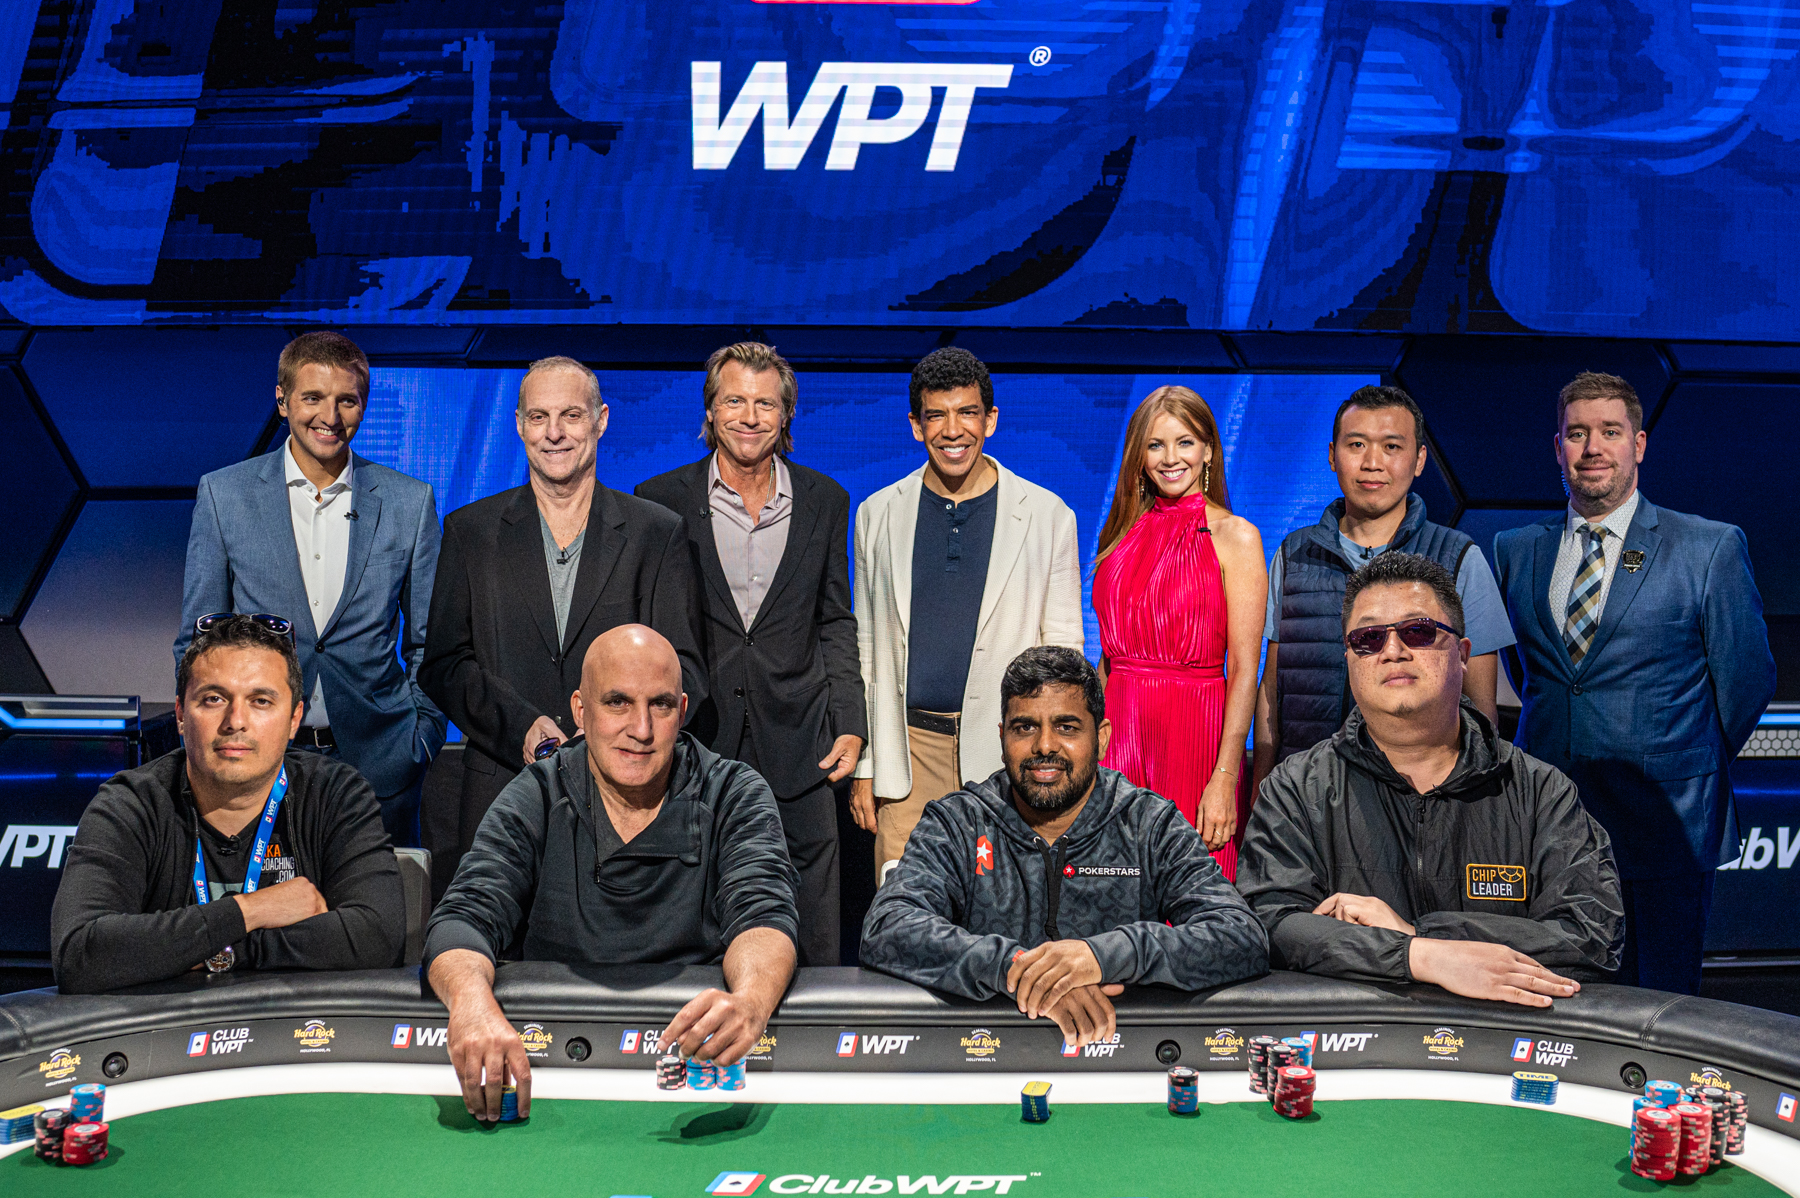 Welcome to Day 1A of the $3,500 WPT Seminole Hard Rock Poker Showdown  Championship Main Tour WPT Seminole Hard Rock Poker Showdown Season 2023 1A